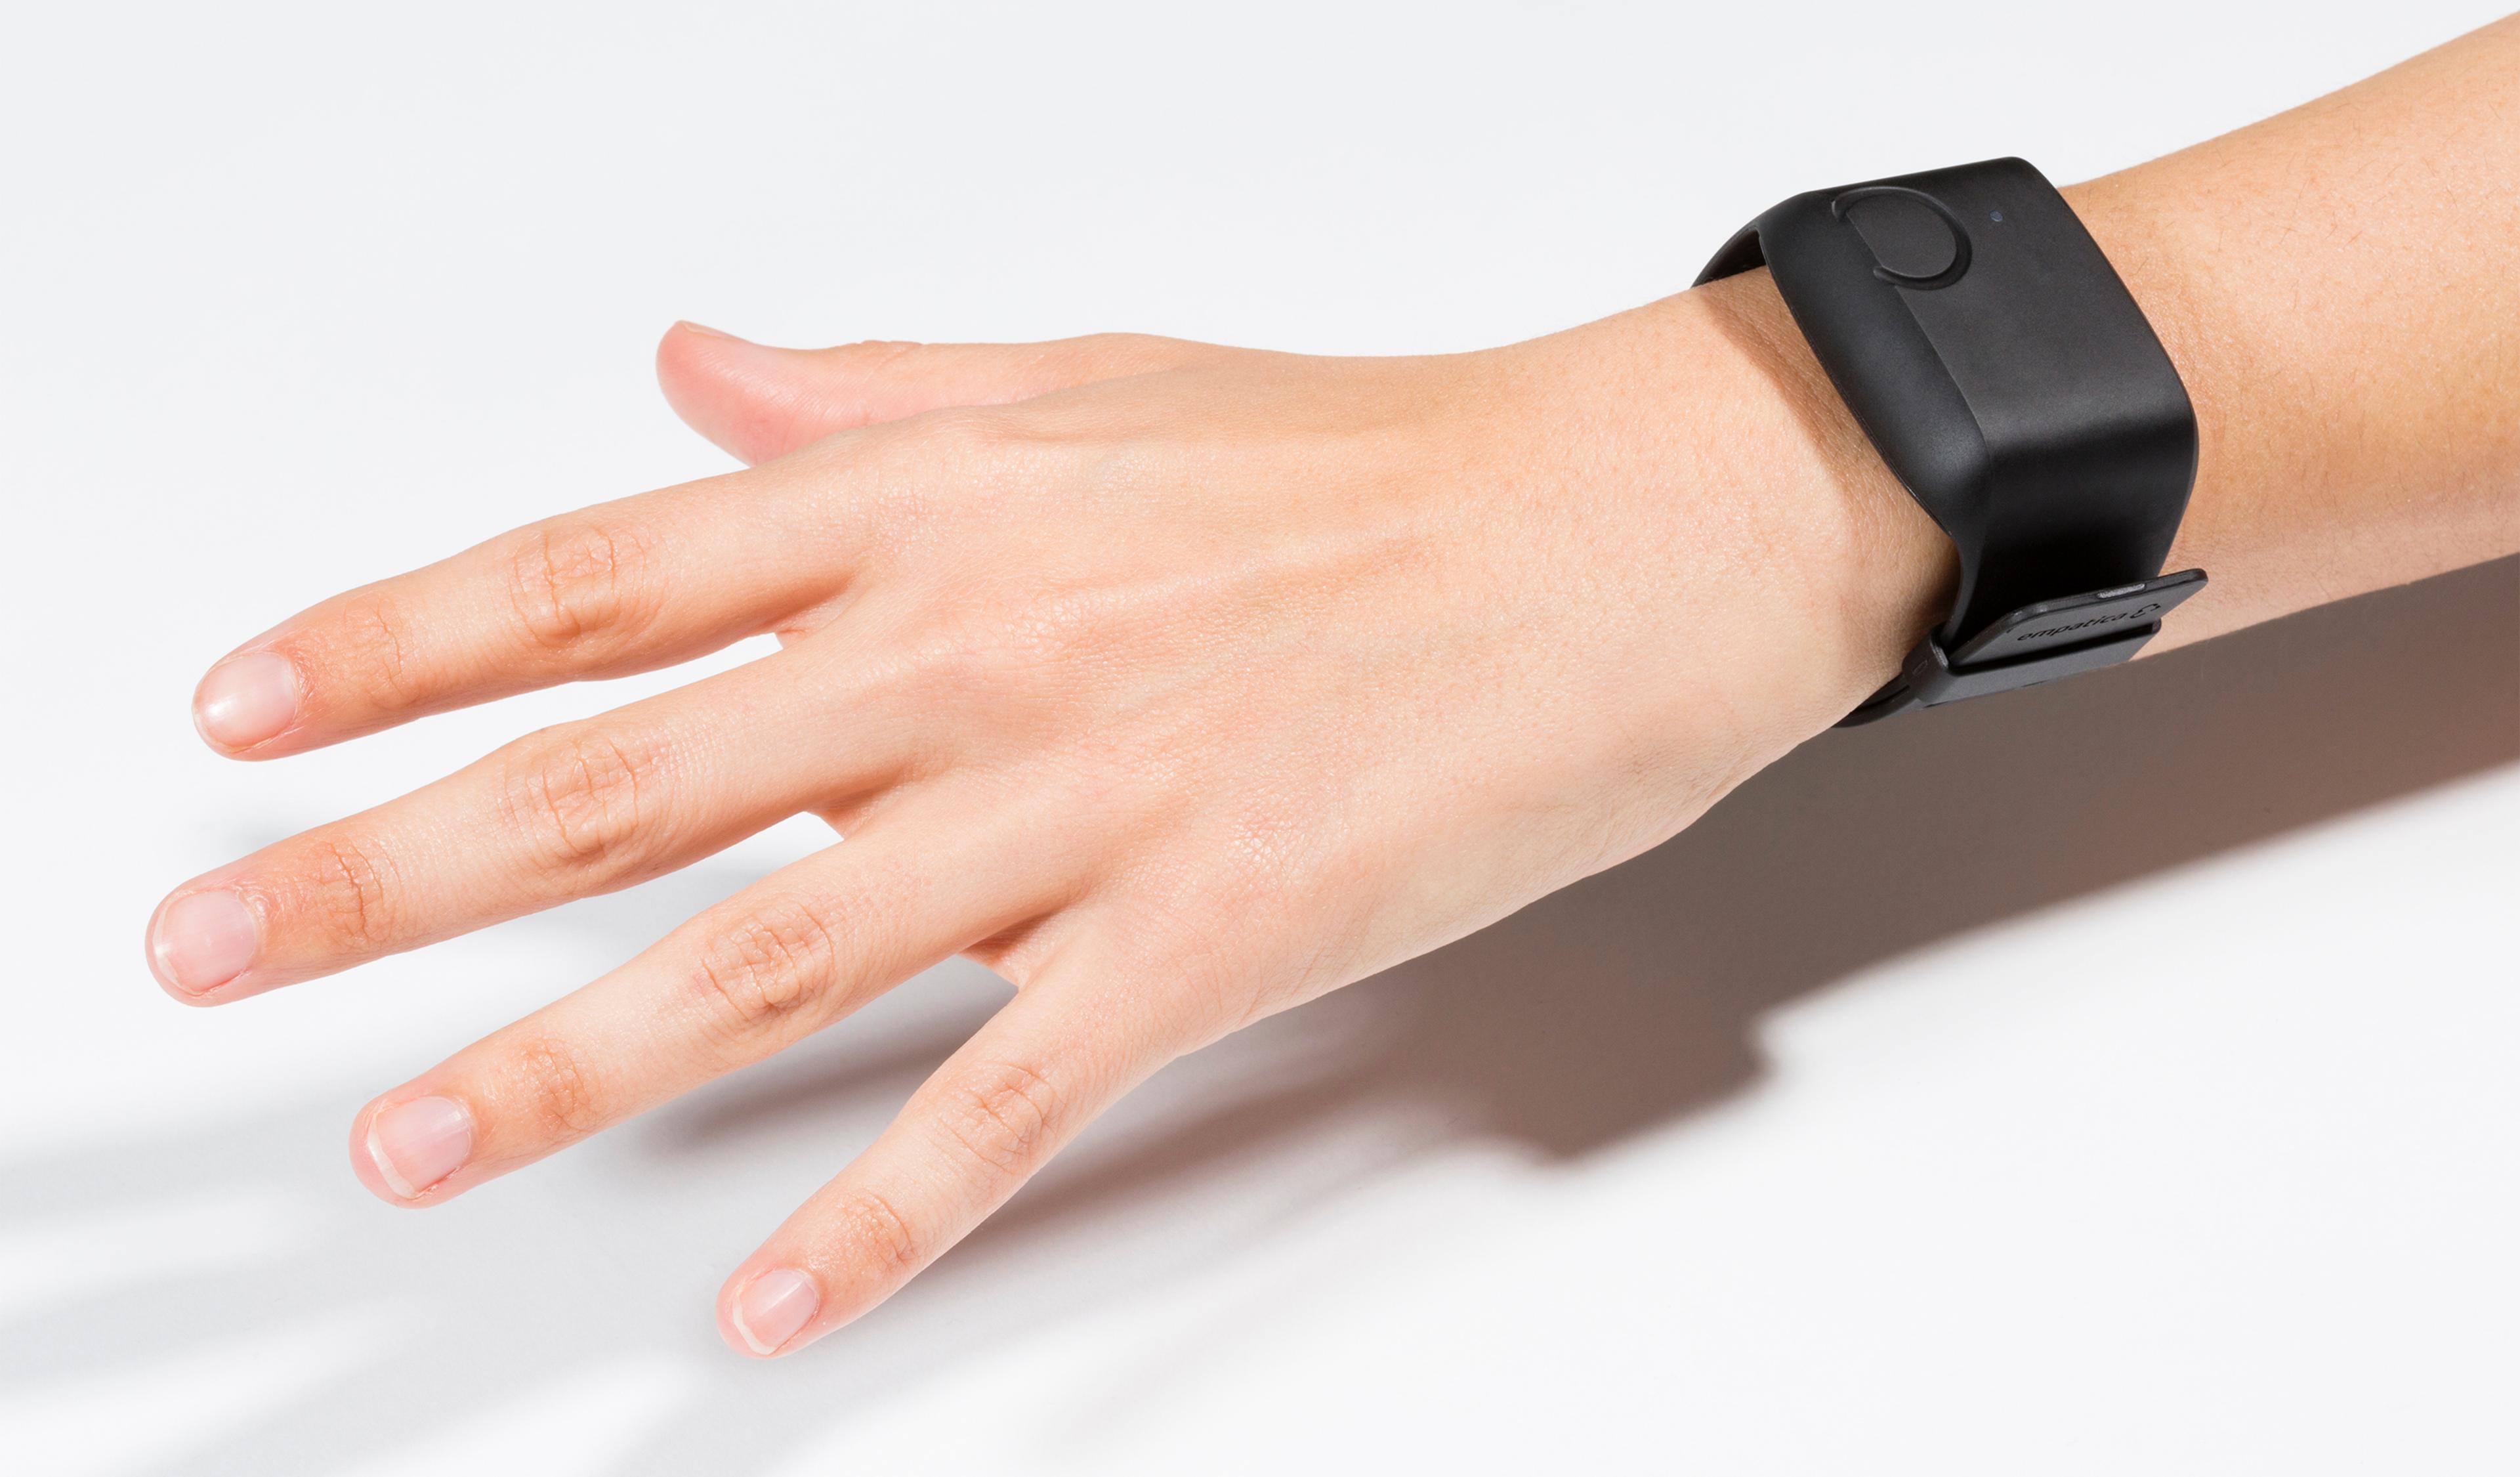 The E4 is a medical-grade wearable device that offers real-time physiological data acquisition, enabling researchers to conduct in-depth analysis and visualization.